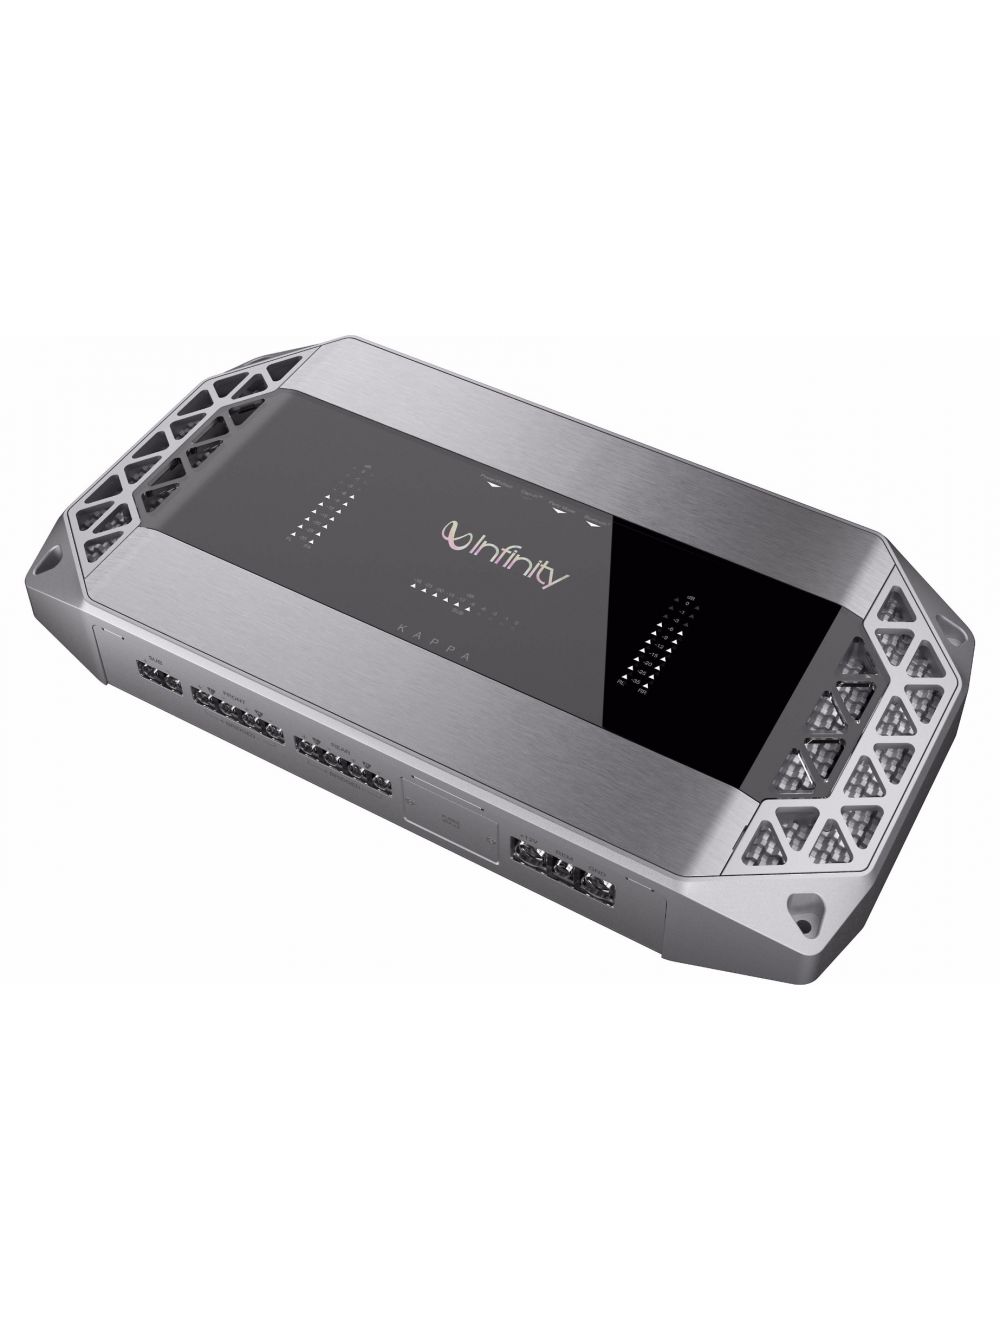 Infinity Kappa K5 Car Amplifier with Bluetooth (Discontinuted)